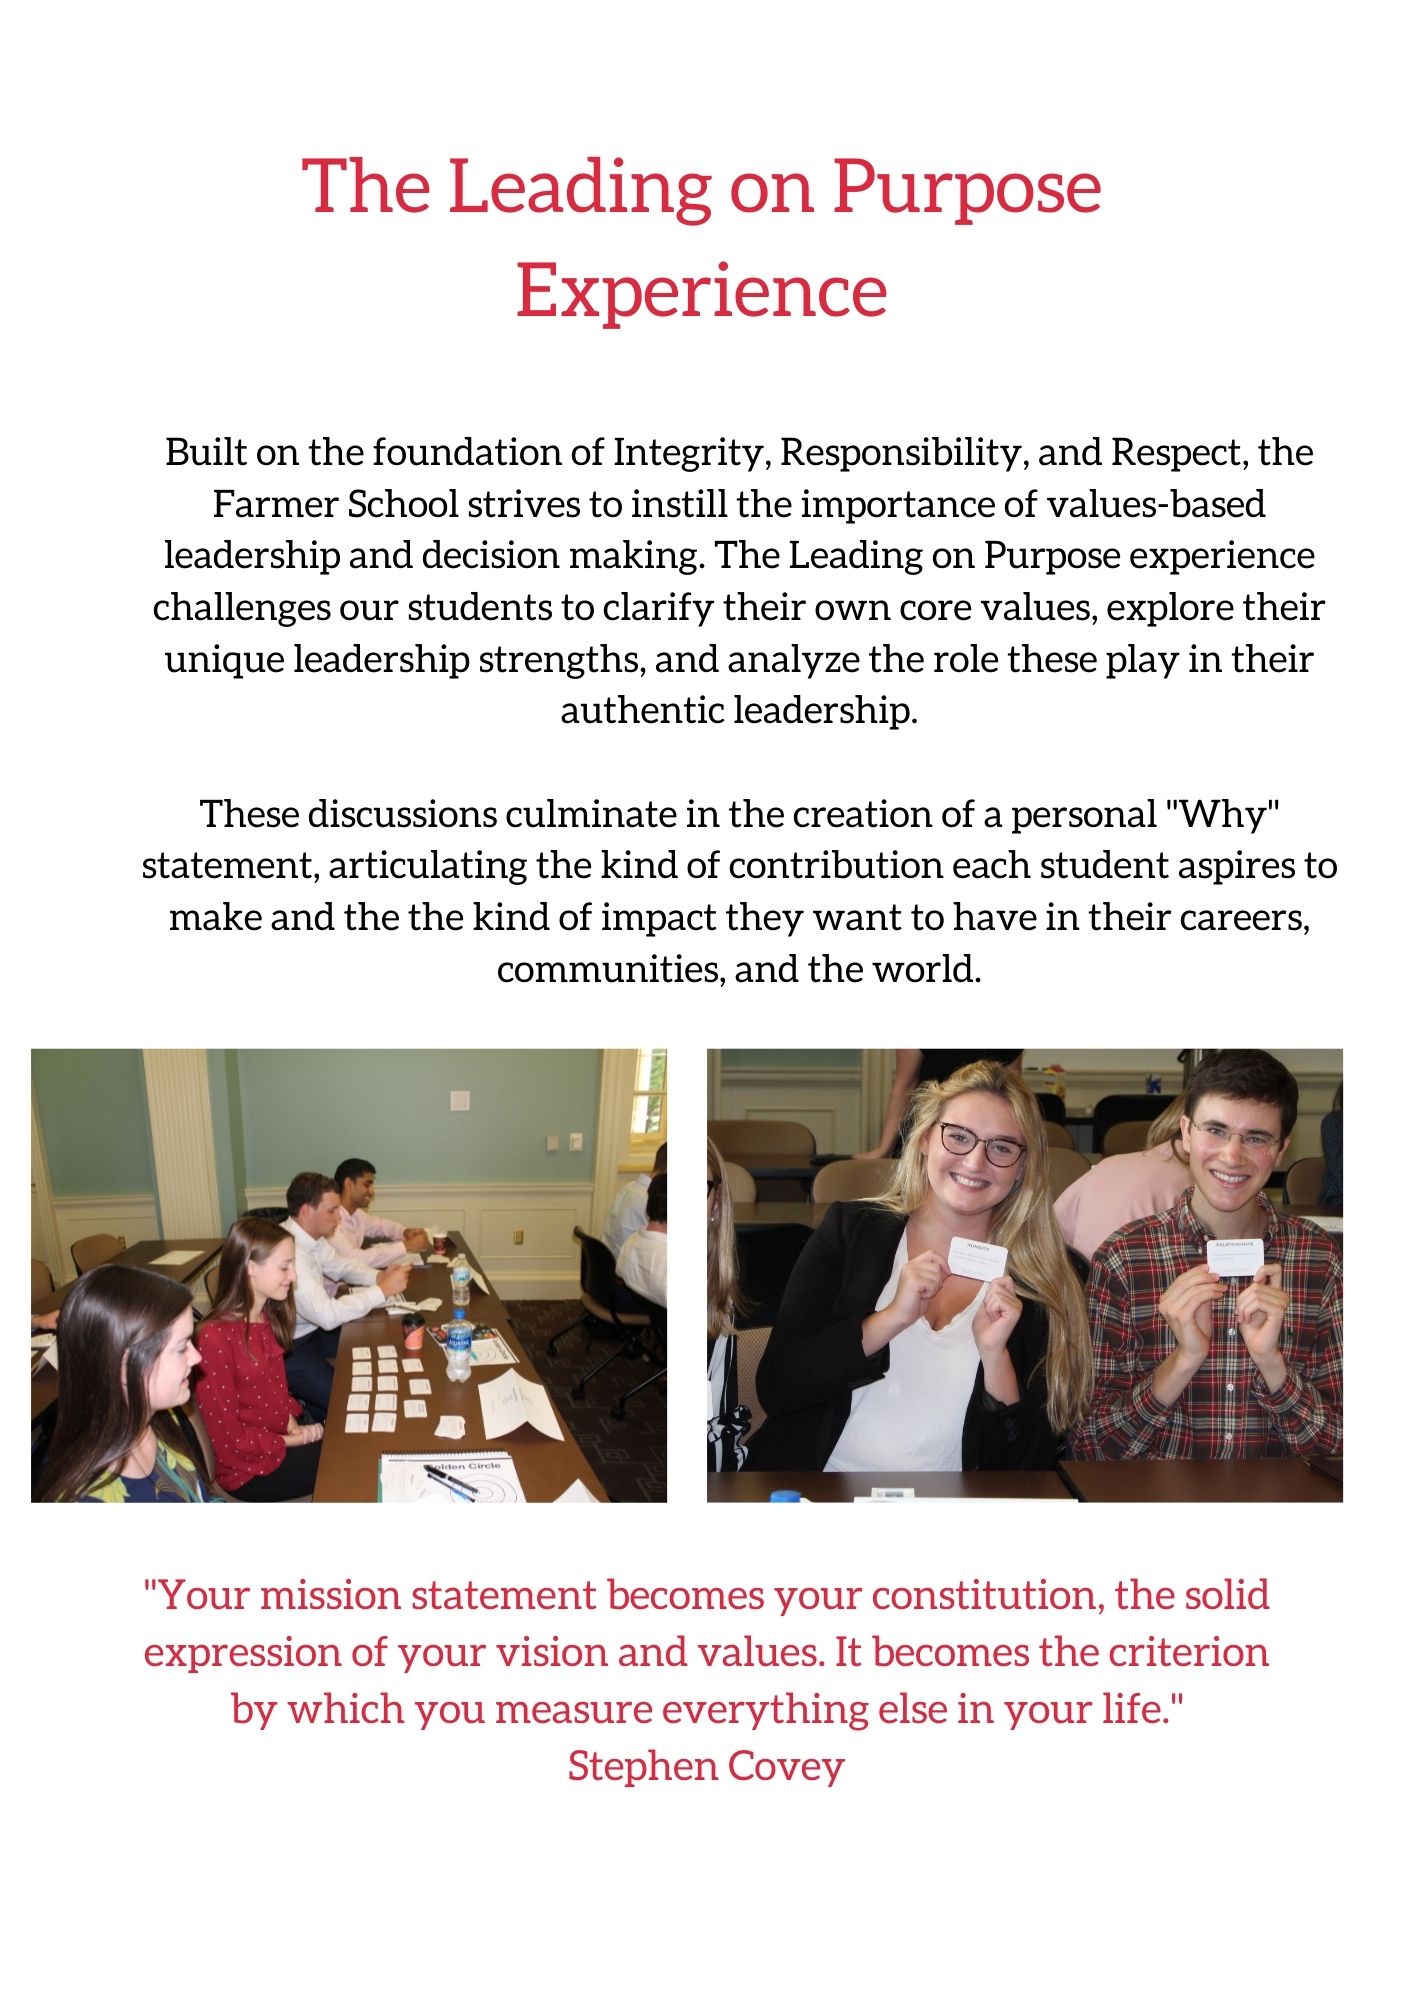  Built on the foundation of Integrity, Responsibility, and Respect, the Farmer School strives to instill the importance of values-based leadership and decision making. The Leading on Purpose experience challenges our students to clarify their own core values, explore their unique leadership strengths, and analyze the role these play in their authentic leadership.  These discussions culminate in the creation of a personal "Why" statement, articulating the kind of contribution each student aspires to make and the the kind of impact they want to have in their careers, communities, and the world. 